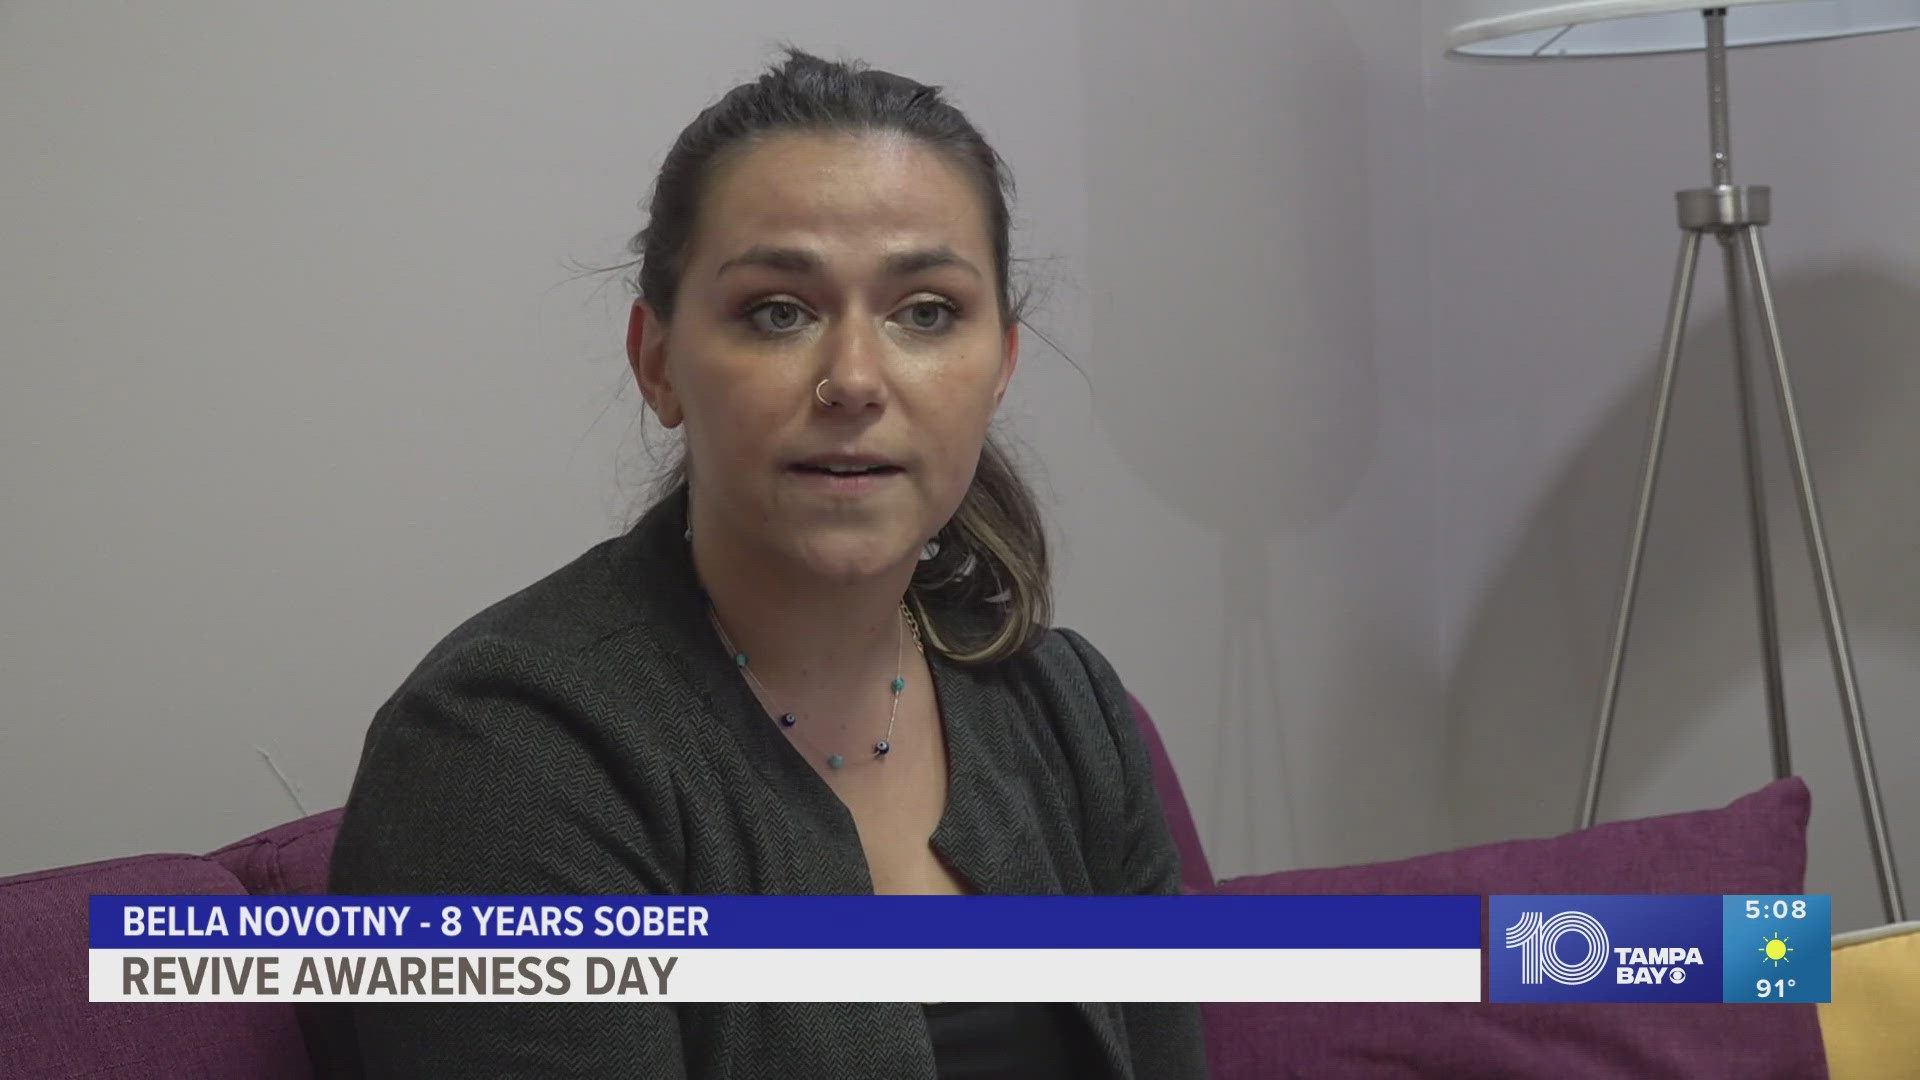 One woman who battled addiction shares how naloxone saved her life. The Florida Department of Health is also sharing how to get naloxone for free.